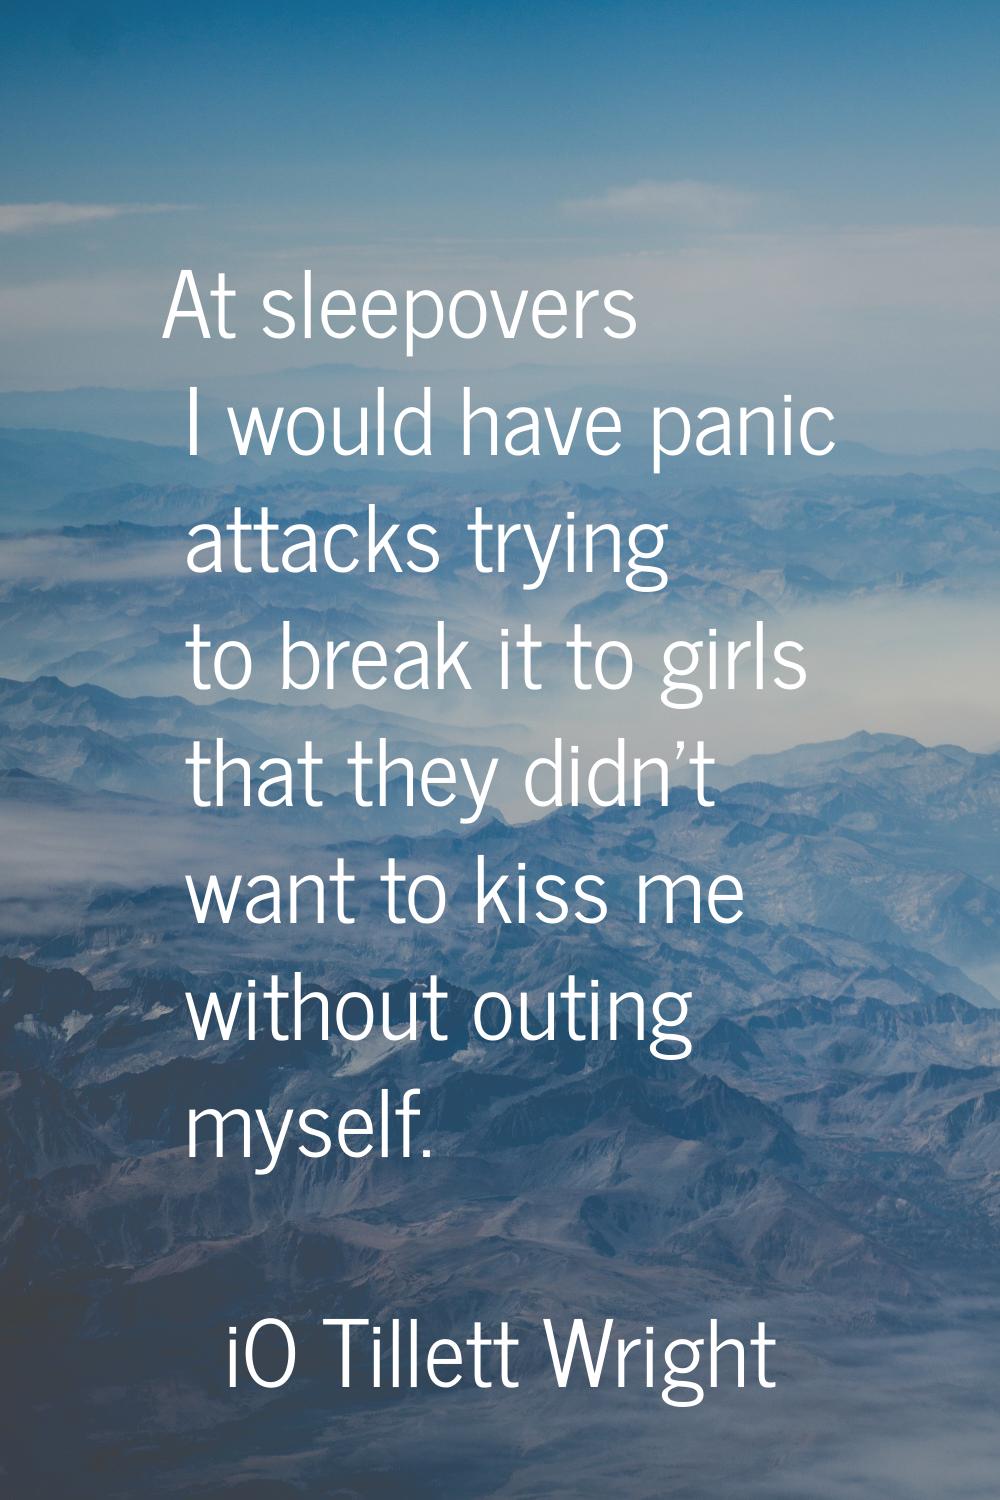 At sleepovers I would have panic attacks trying to break it to girls that they didn't want to kiss 